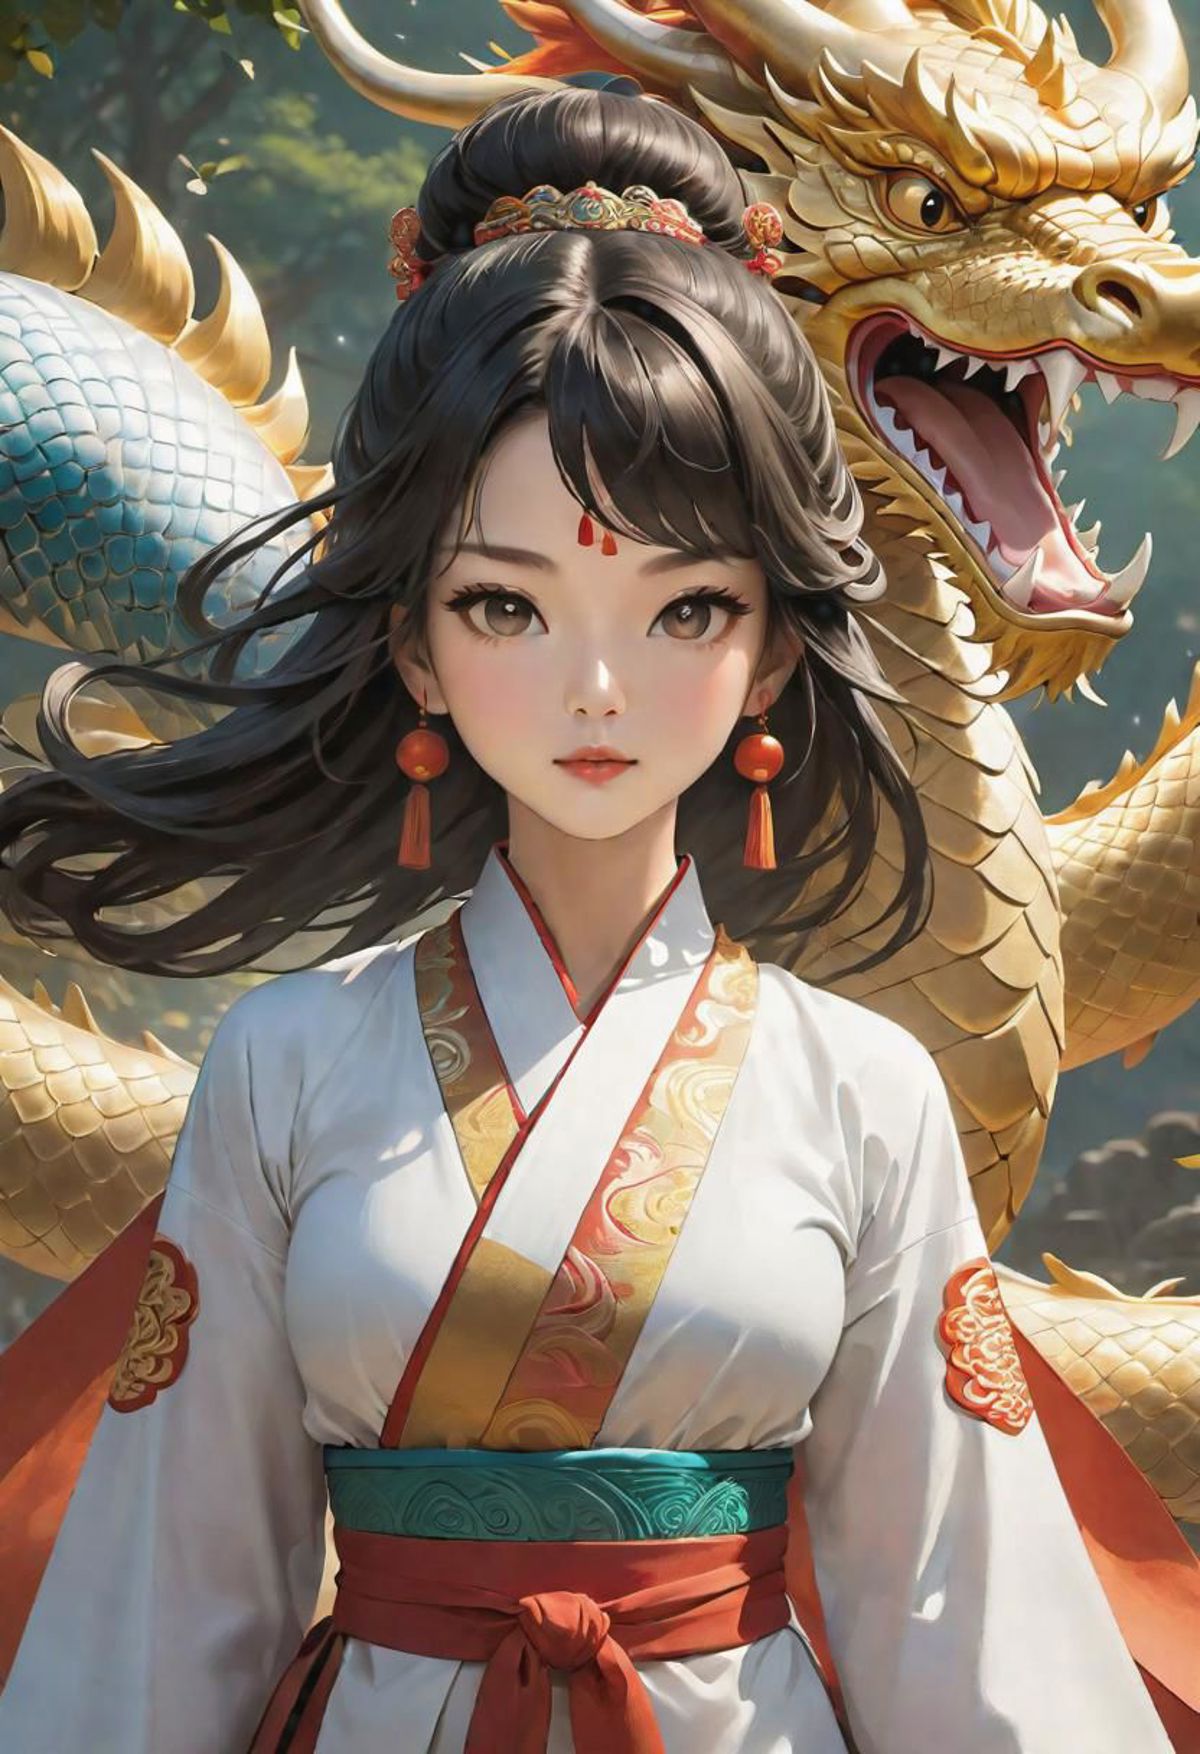 Anime girl with red hair and red earrings standing next to a dragon.